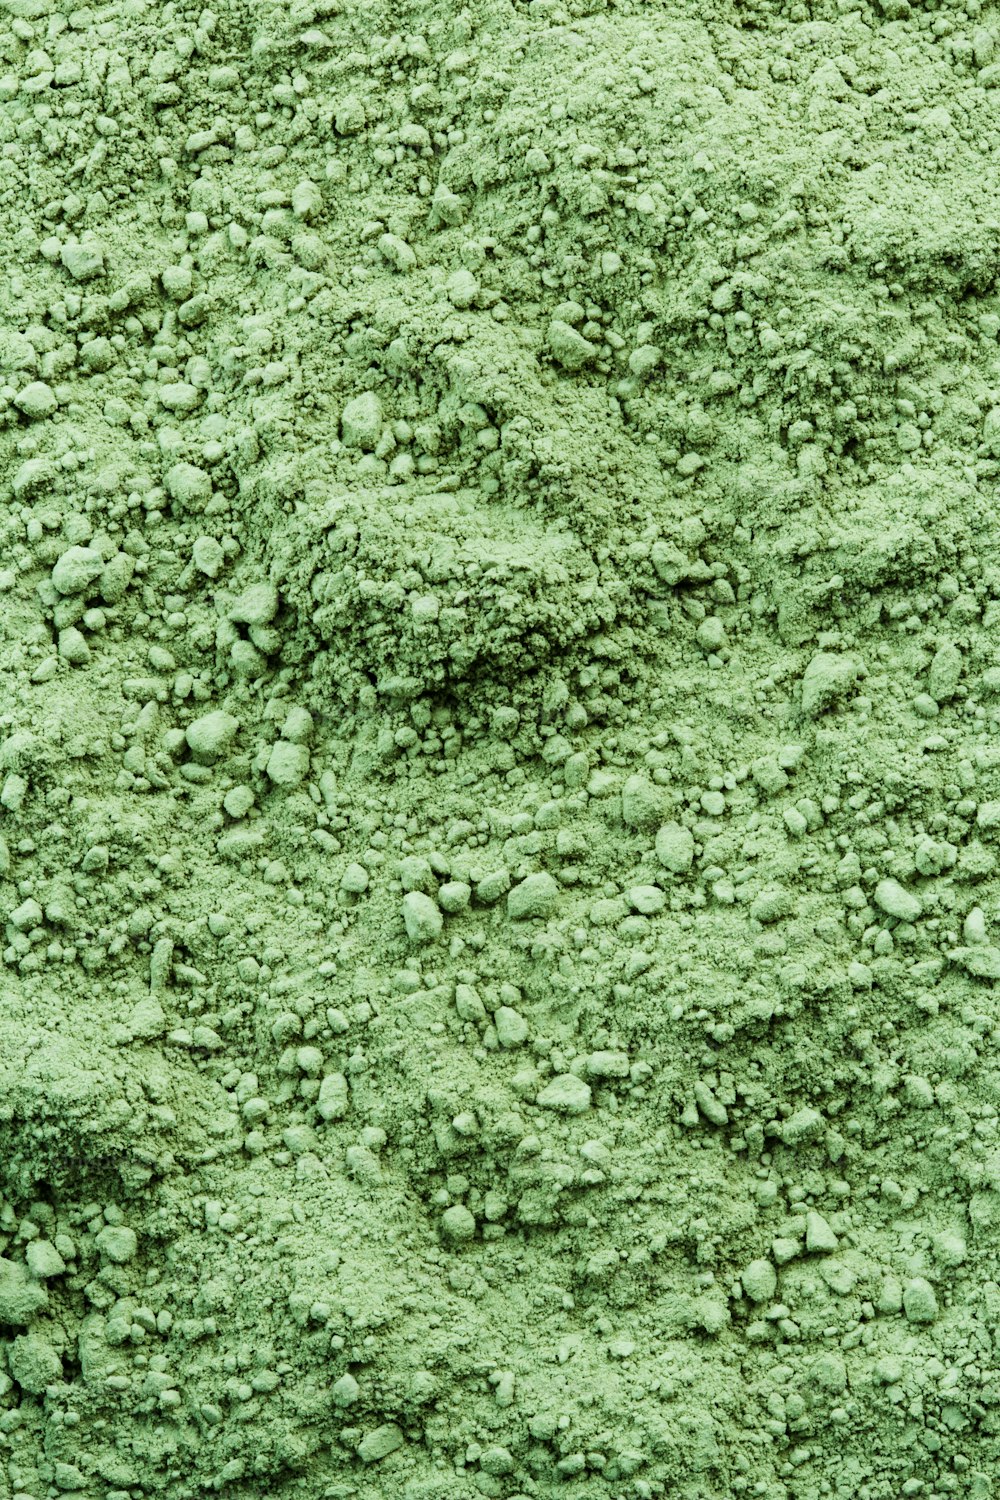 a close up of a green colored substance